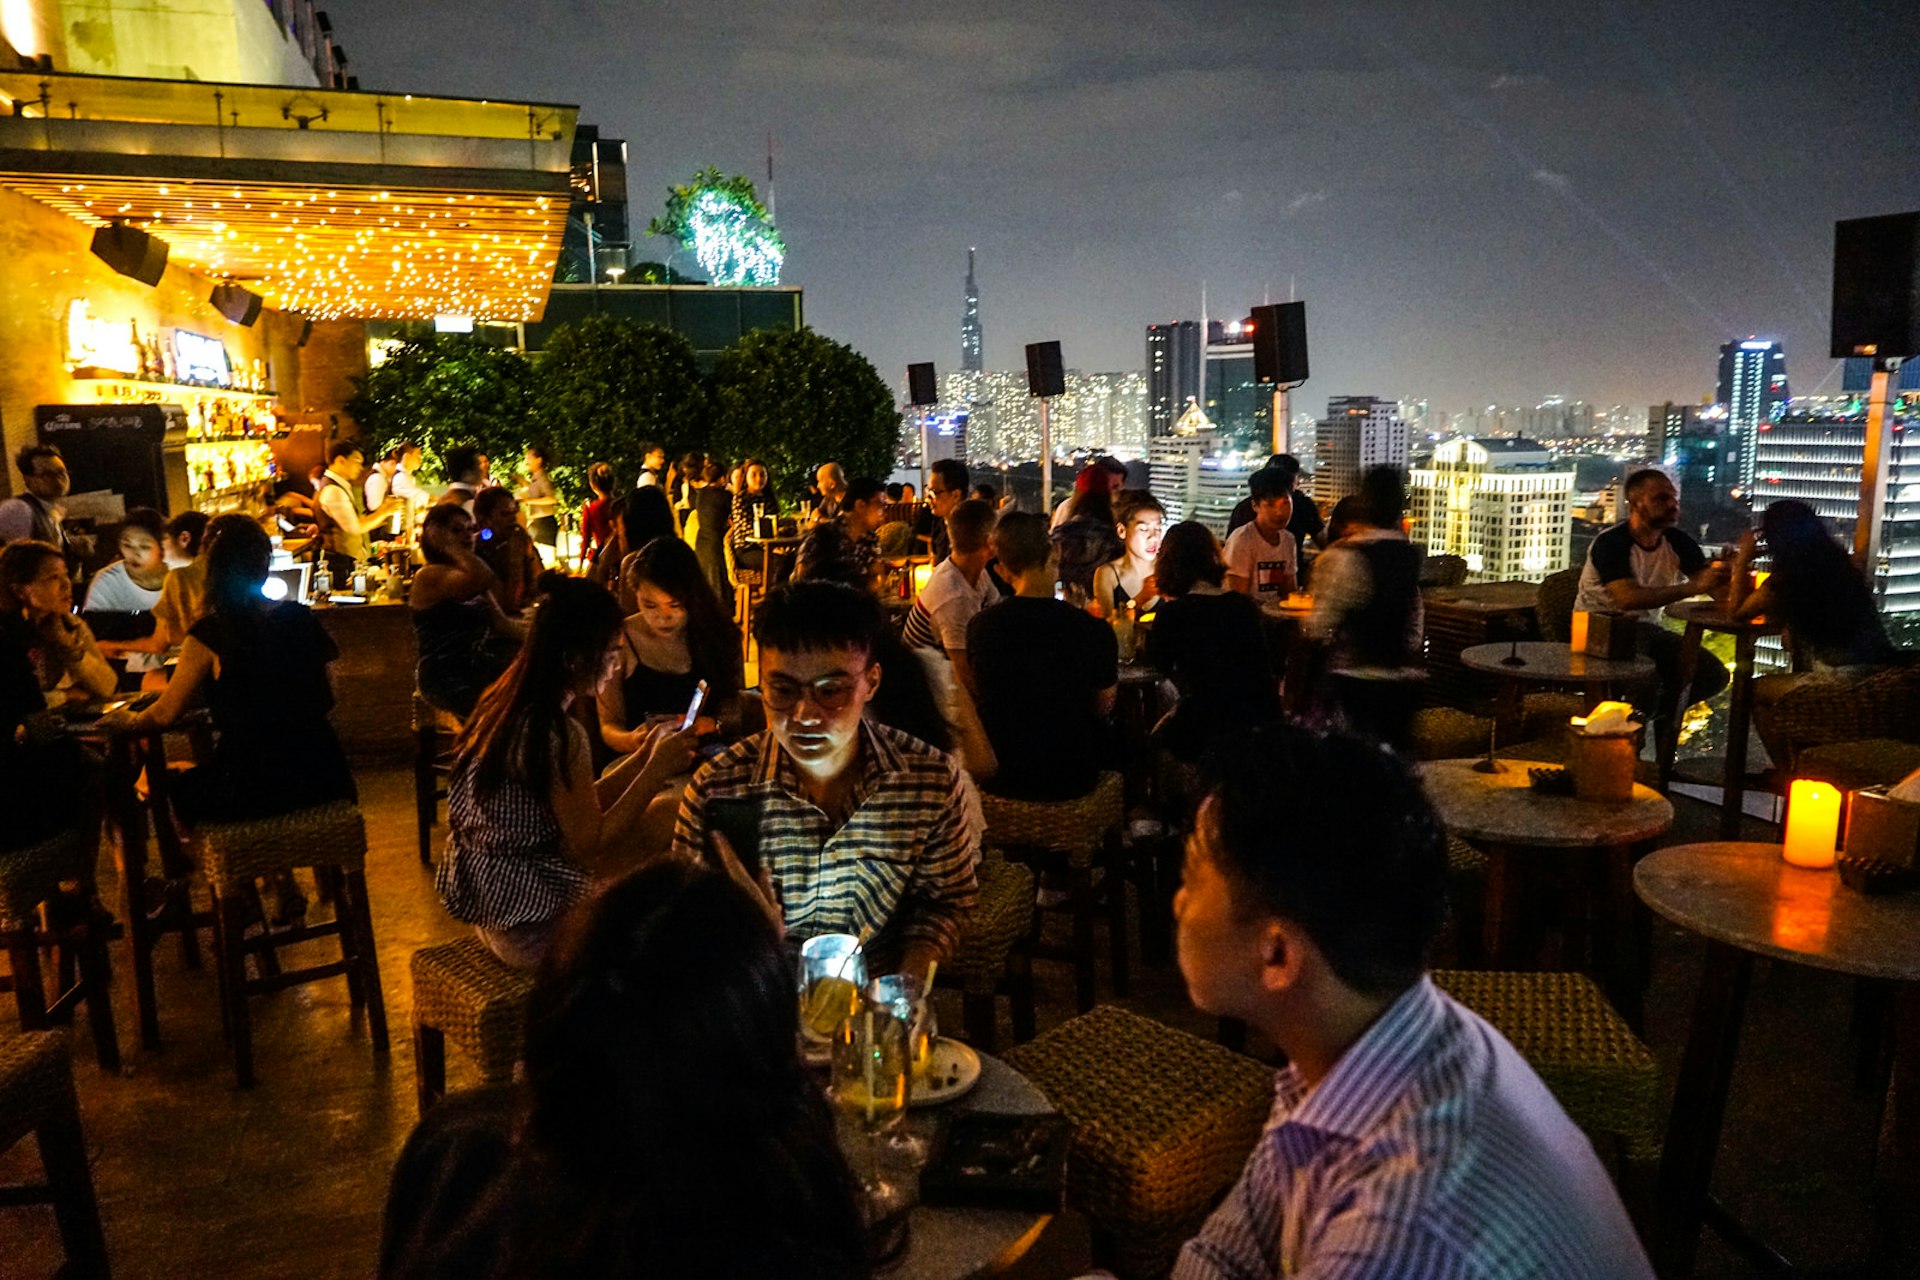 Revellers gather at Saigon Social Club's rooftop bar to drink and dine. The space twinkles with candles and fairylights as well as city lights in the background. 